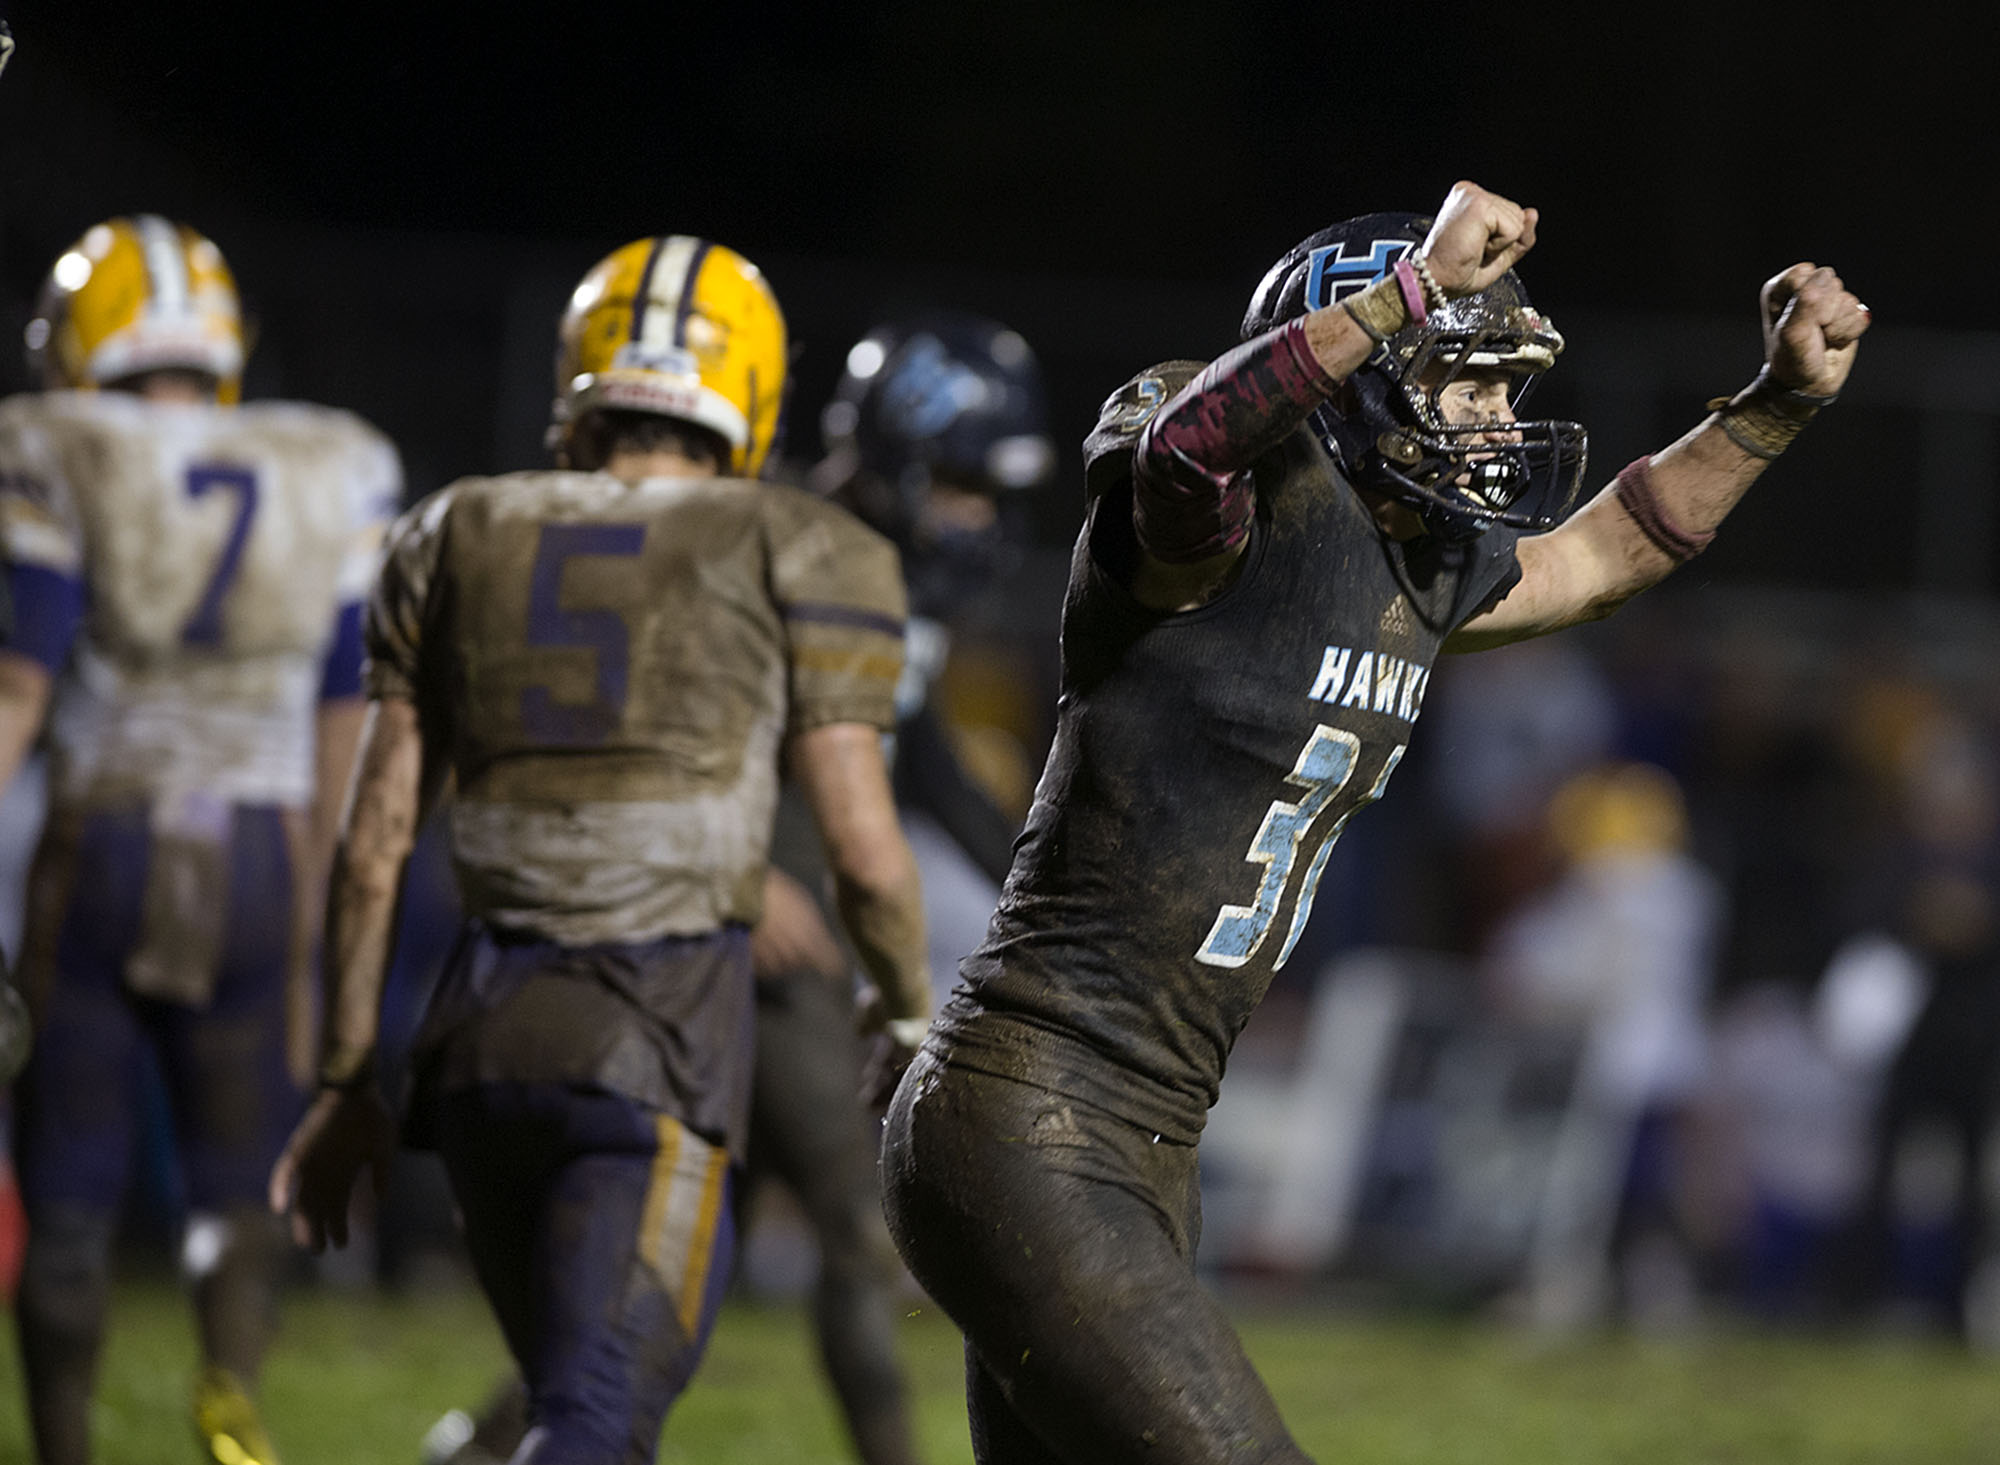 Hockinson's Wyatt Jones (31) celebrates after a Columbia River field goal attempt is no good in the third quarter at Hockinson High School on Friday night, Oct. 14, 2016.